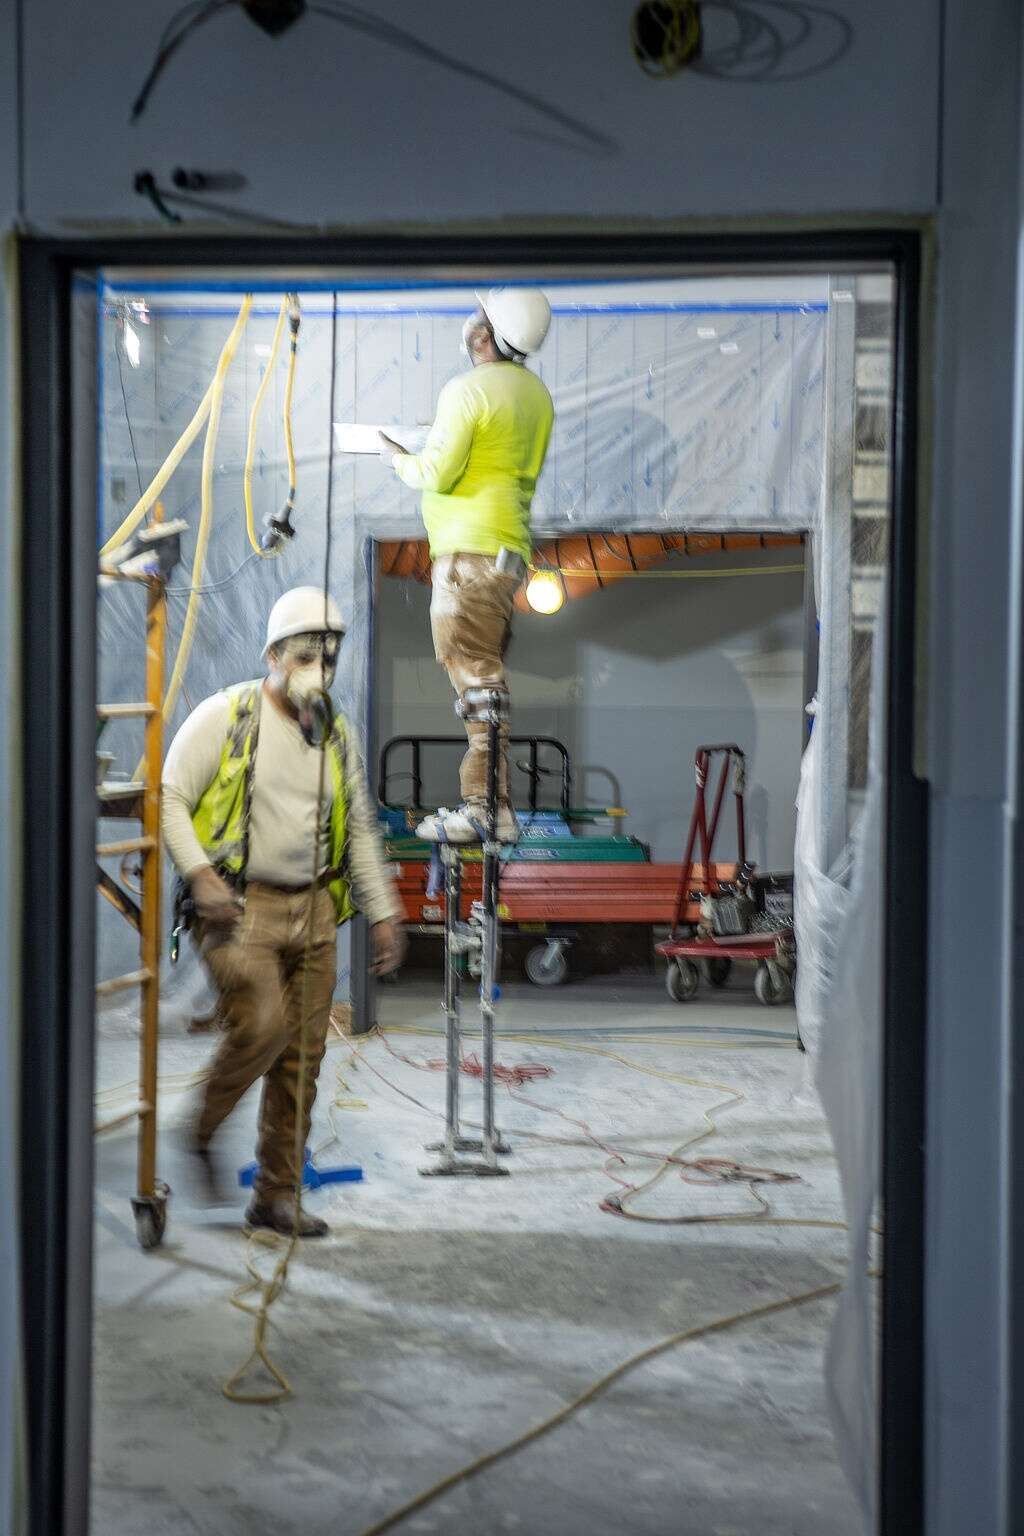 Construction crews work inside one of the operating rooms located within Vail Health's new medical center in Dillon on Friday, August 27, 2021. Once completed, the center will have four operating rooms that'll focus on orthopedic and pain management procedures. | Photo by Michael Yearout / Michael Yearout Photography